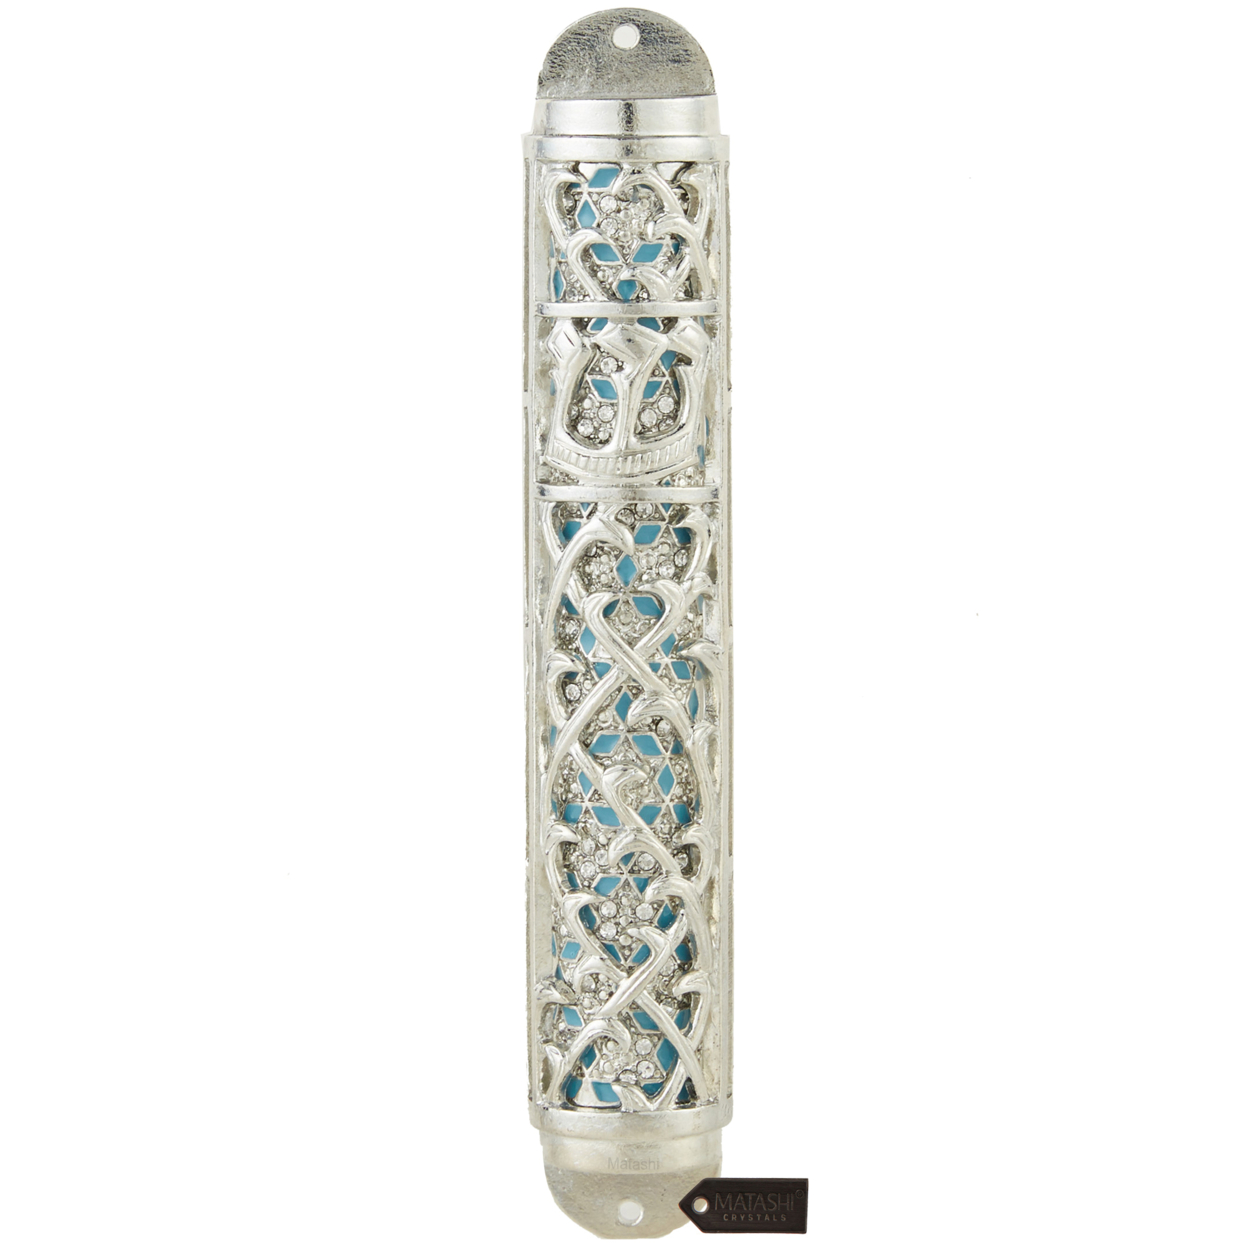 Matashi Hand Painted Enamel Mezuzah W Hebrew Shin And Crystals Home Decor For Jewish Holiday Housewarming House Blessing Gift For Holiday